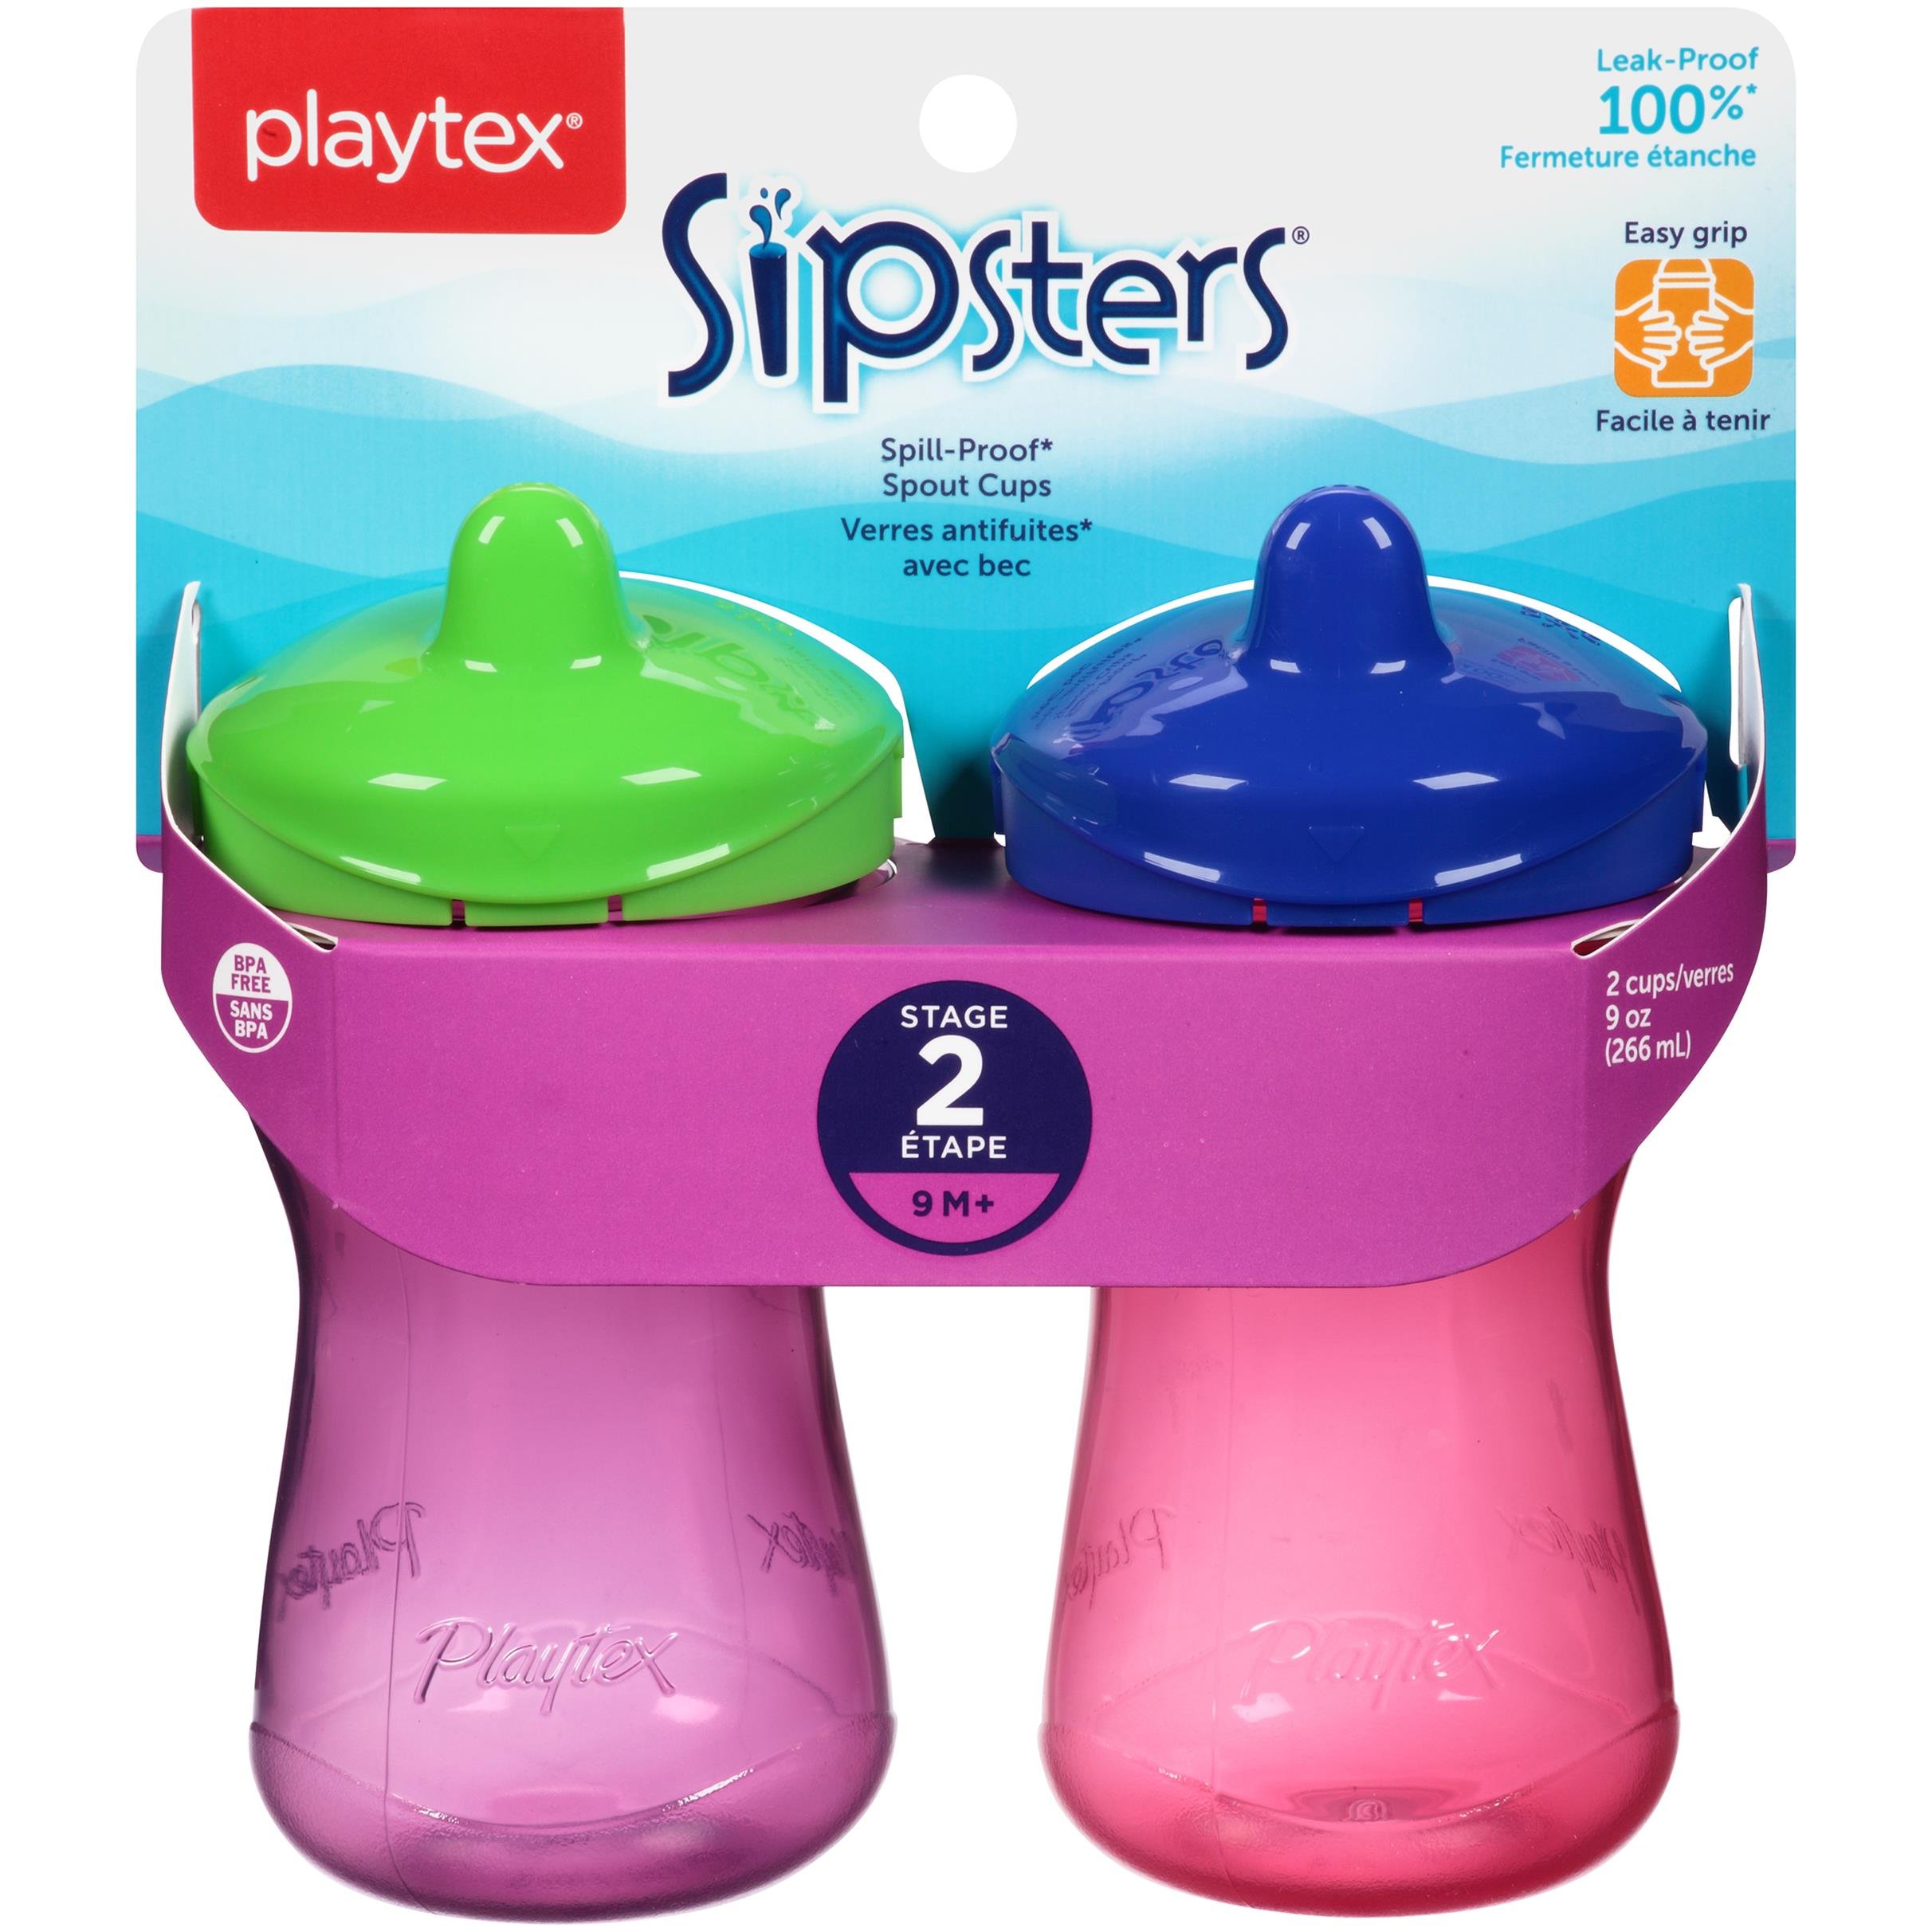 Playtex Sipsters Stage 2 Spill-Proof, Leak-Proof, Break-Proof Spout Sippy Cups - 9 Ounce - 2 Count (Color May Vary)